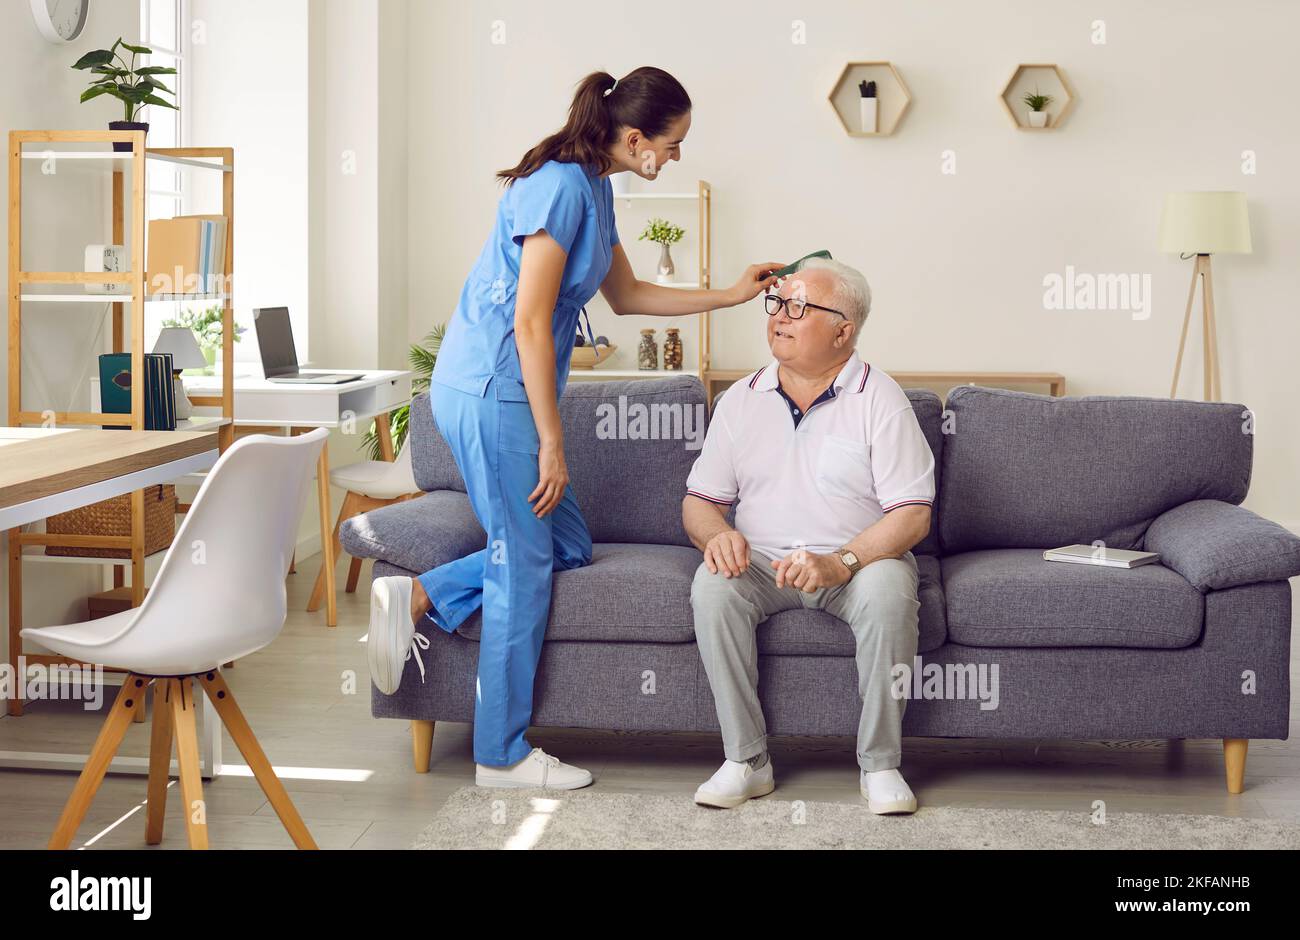 Friendly young female nurse combs hair of older man sitting on sofa in nursing home. Stock Photo